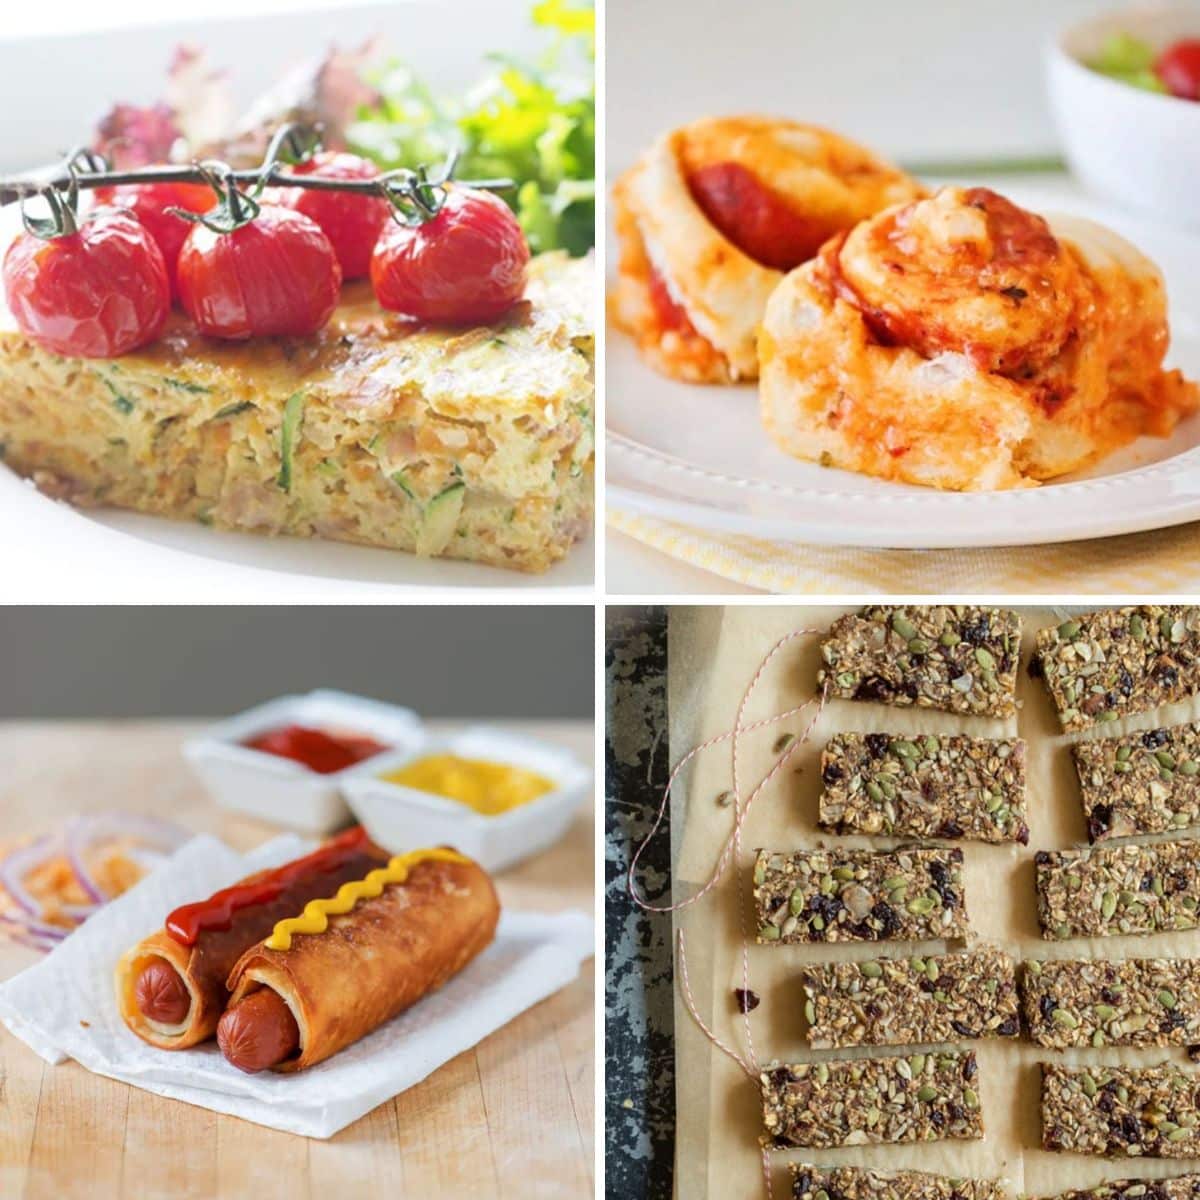 4 images of simple and yummy lunch box recipes for kids.